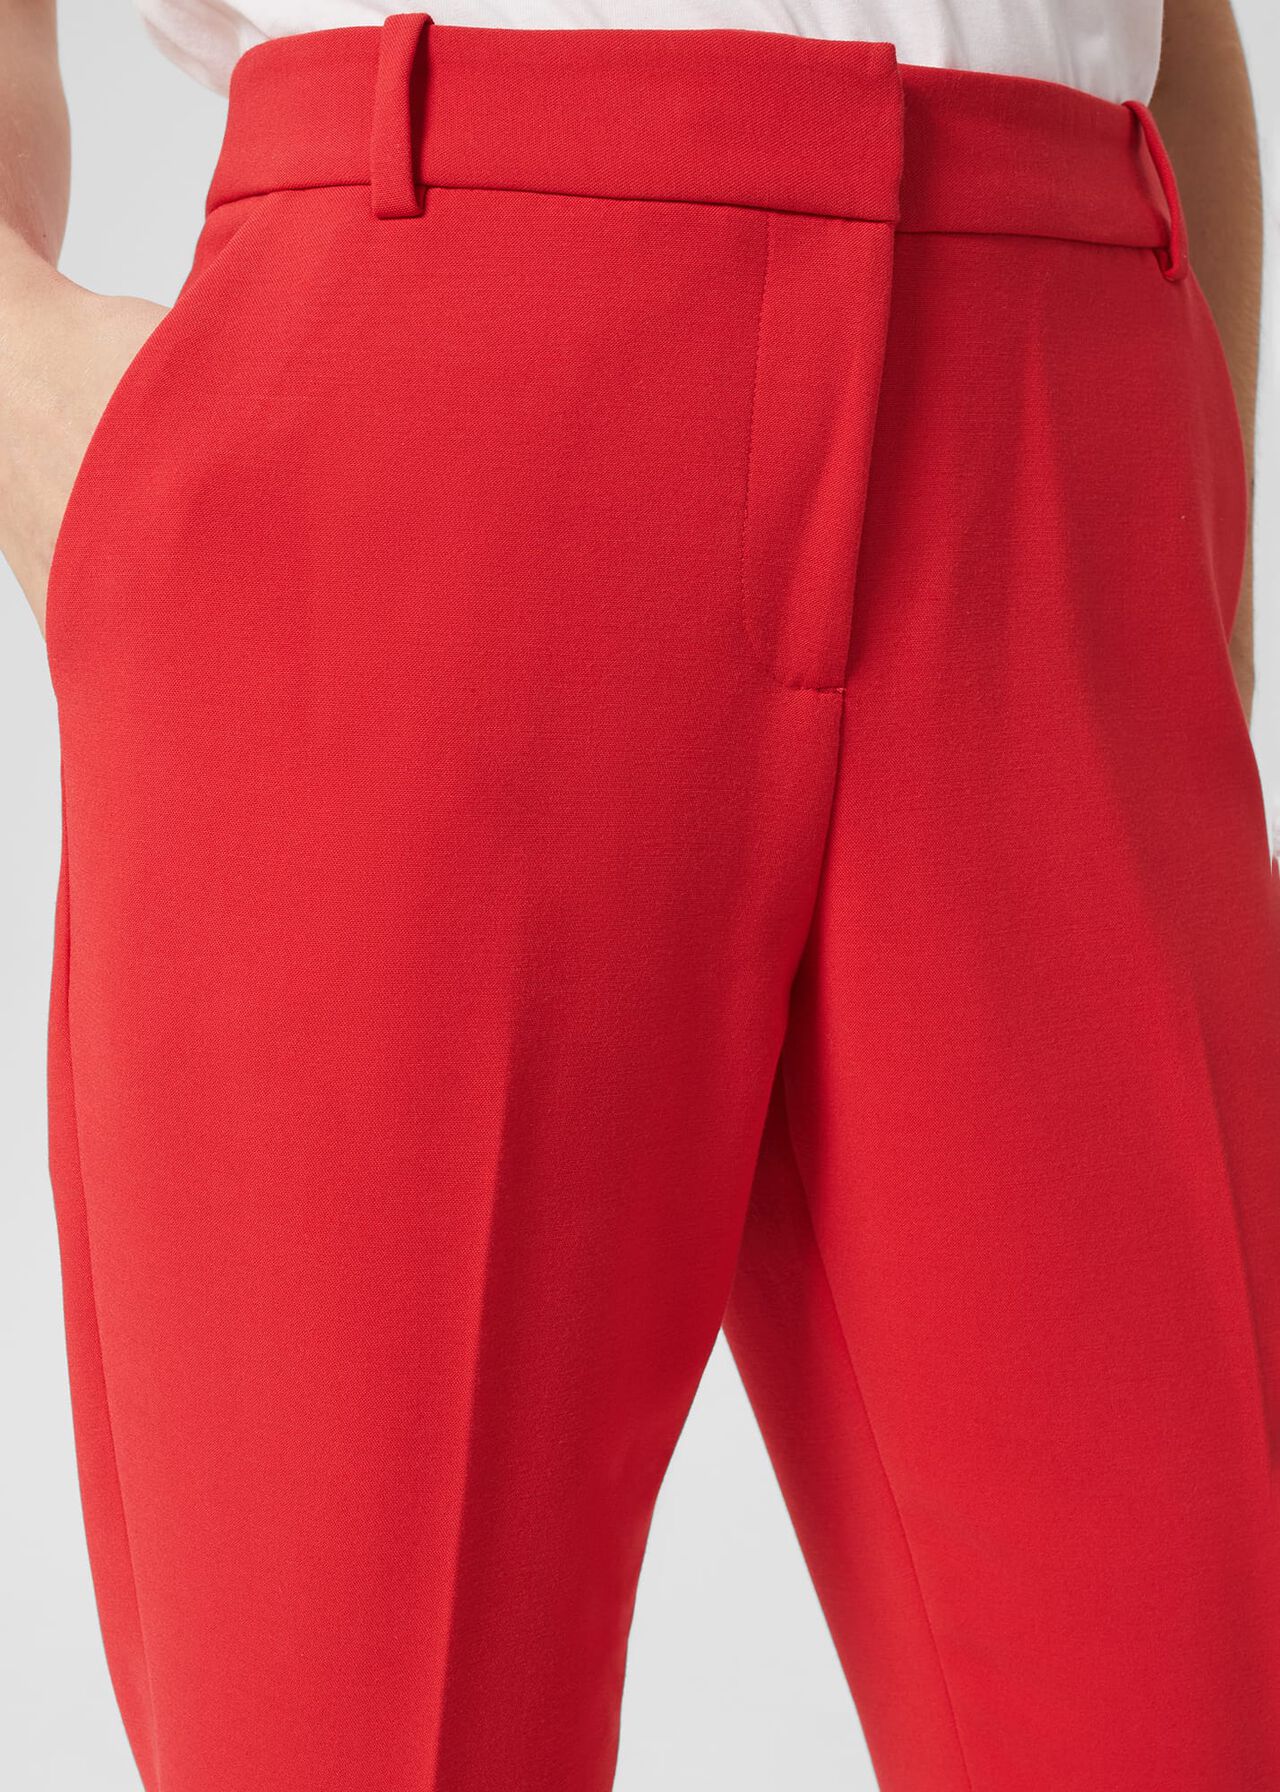 Suki Trousers, Flame Red, hi-res